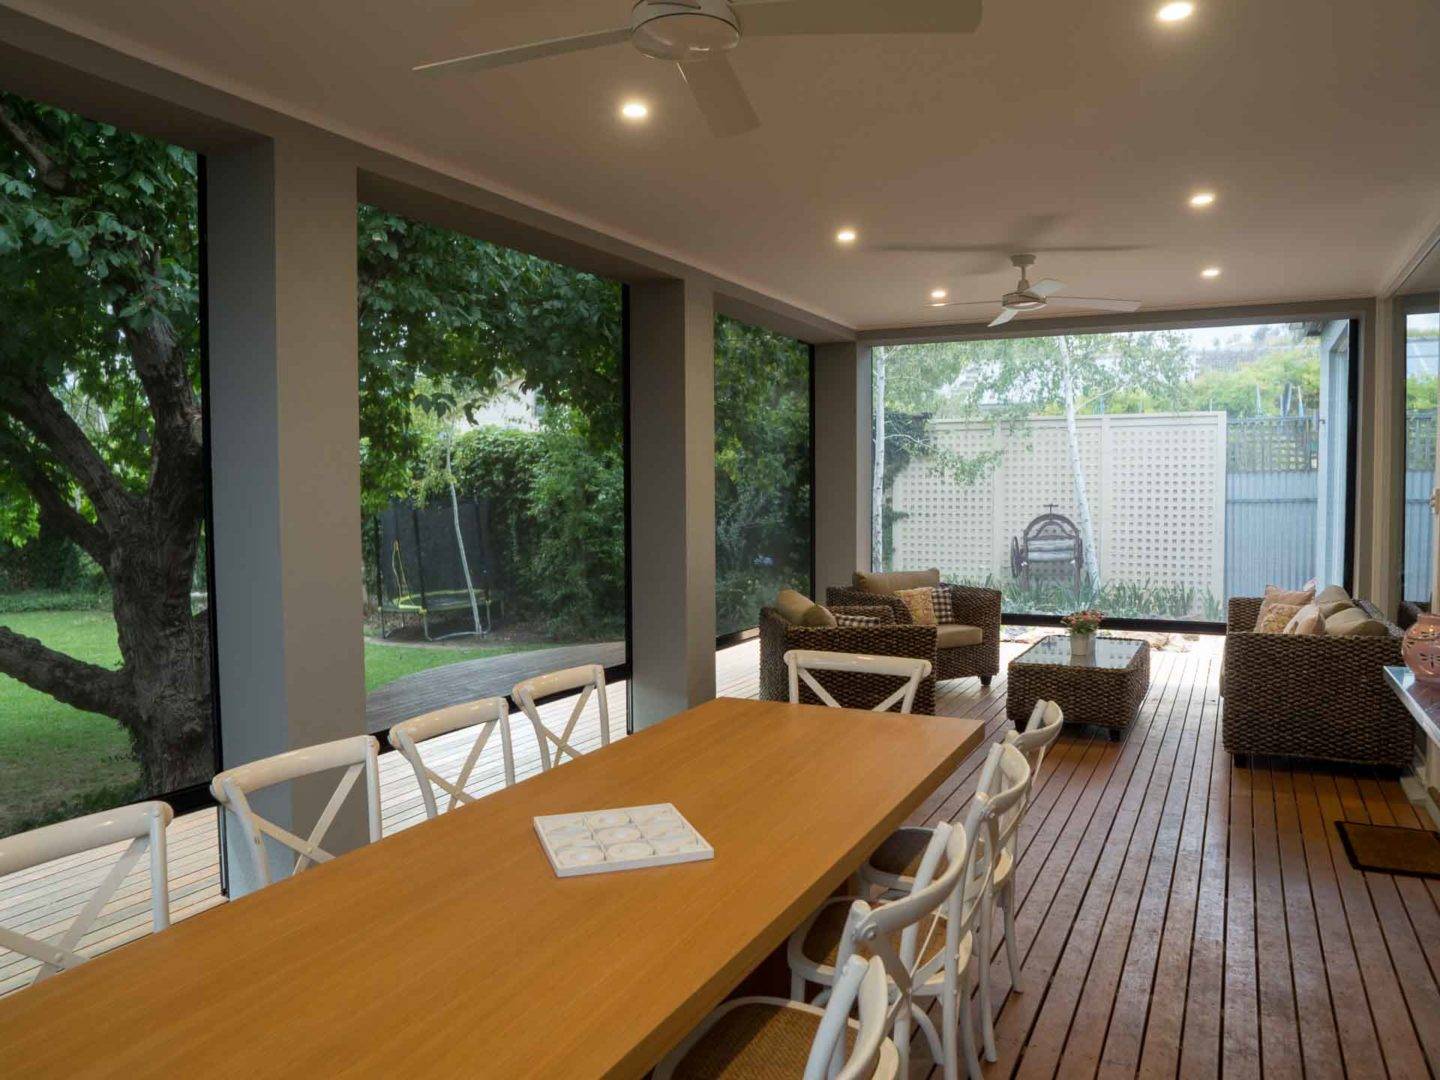 How to maintain your cafe, patio or outdoor roller blinds - Australian Outdoor Living